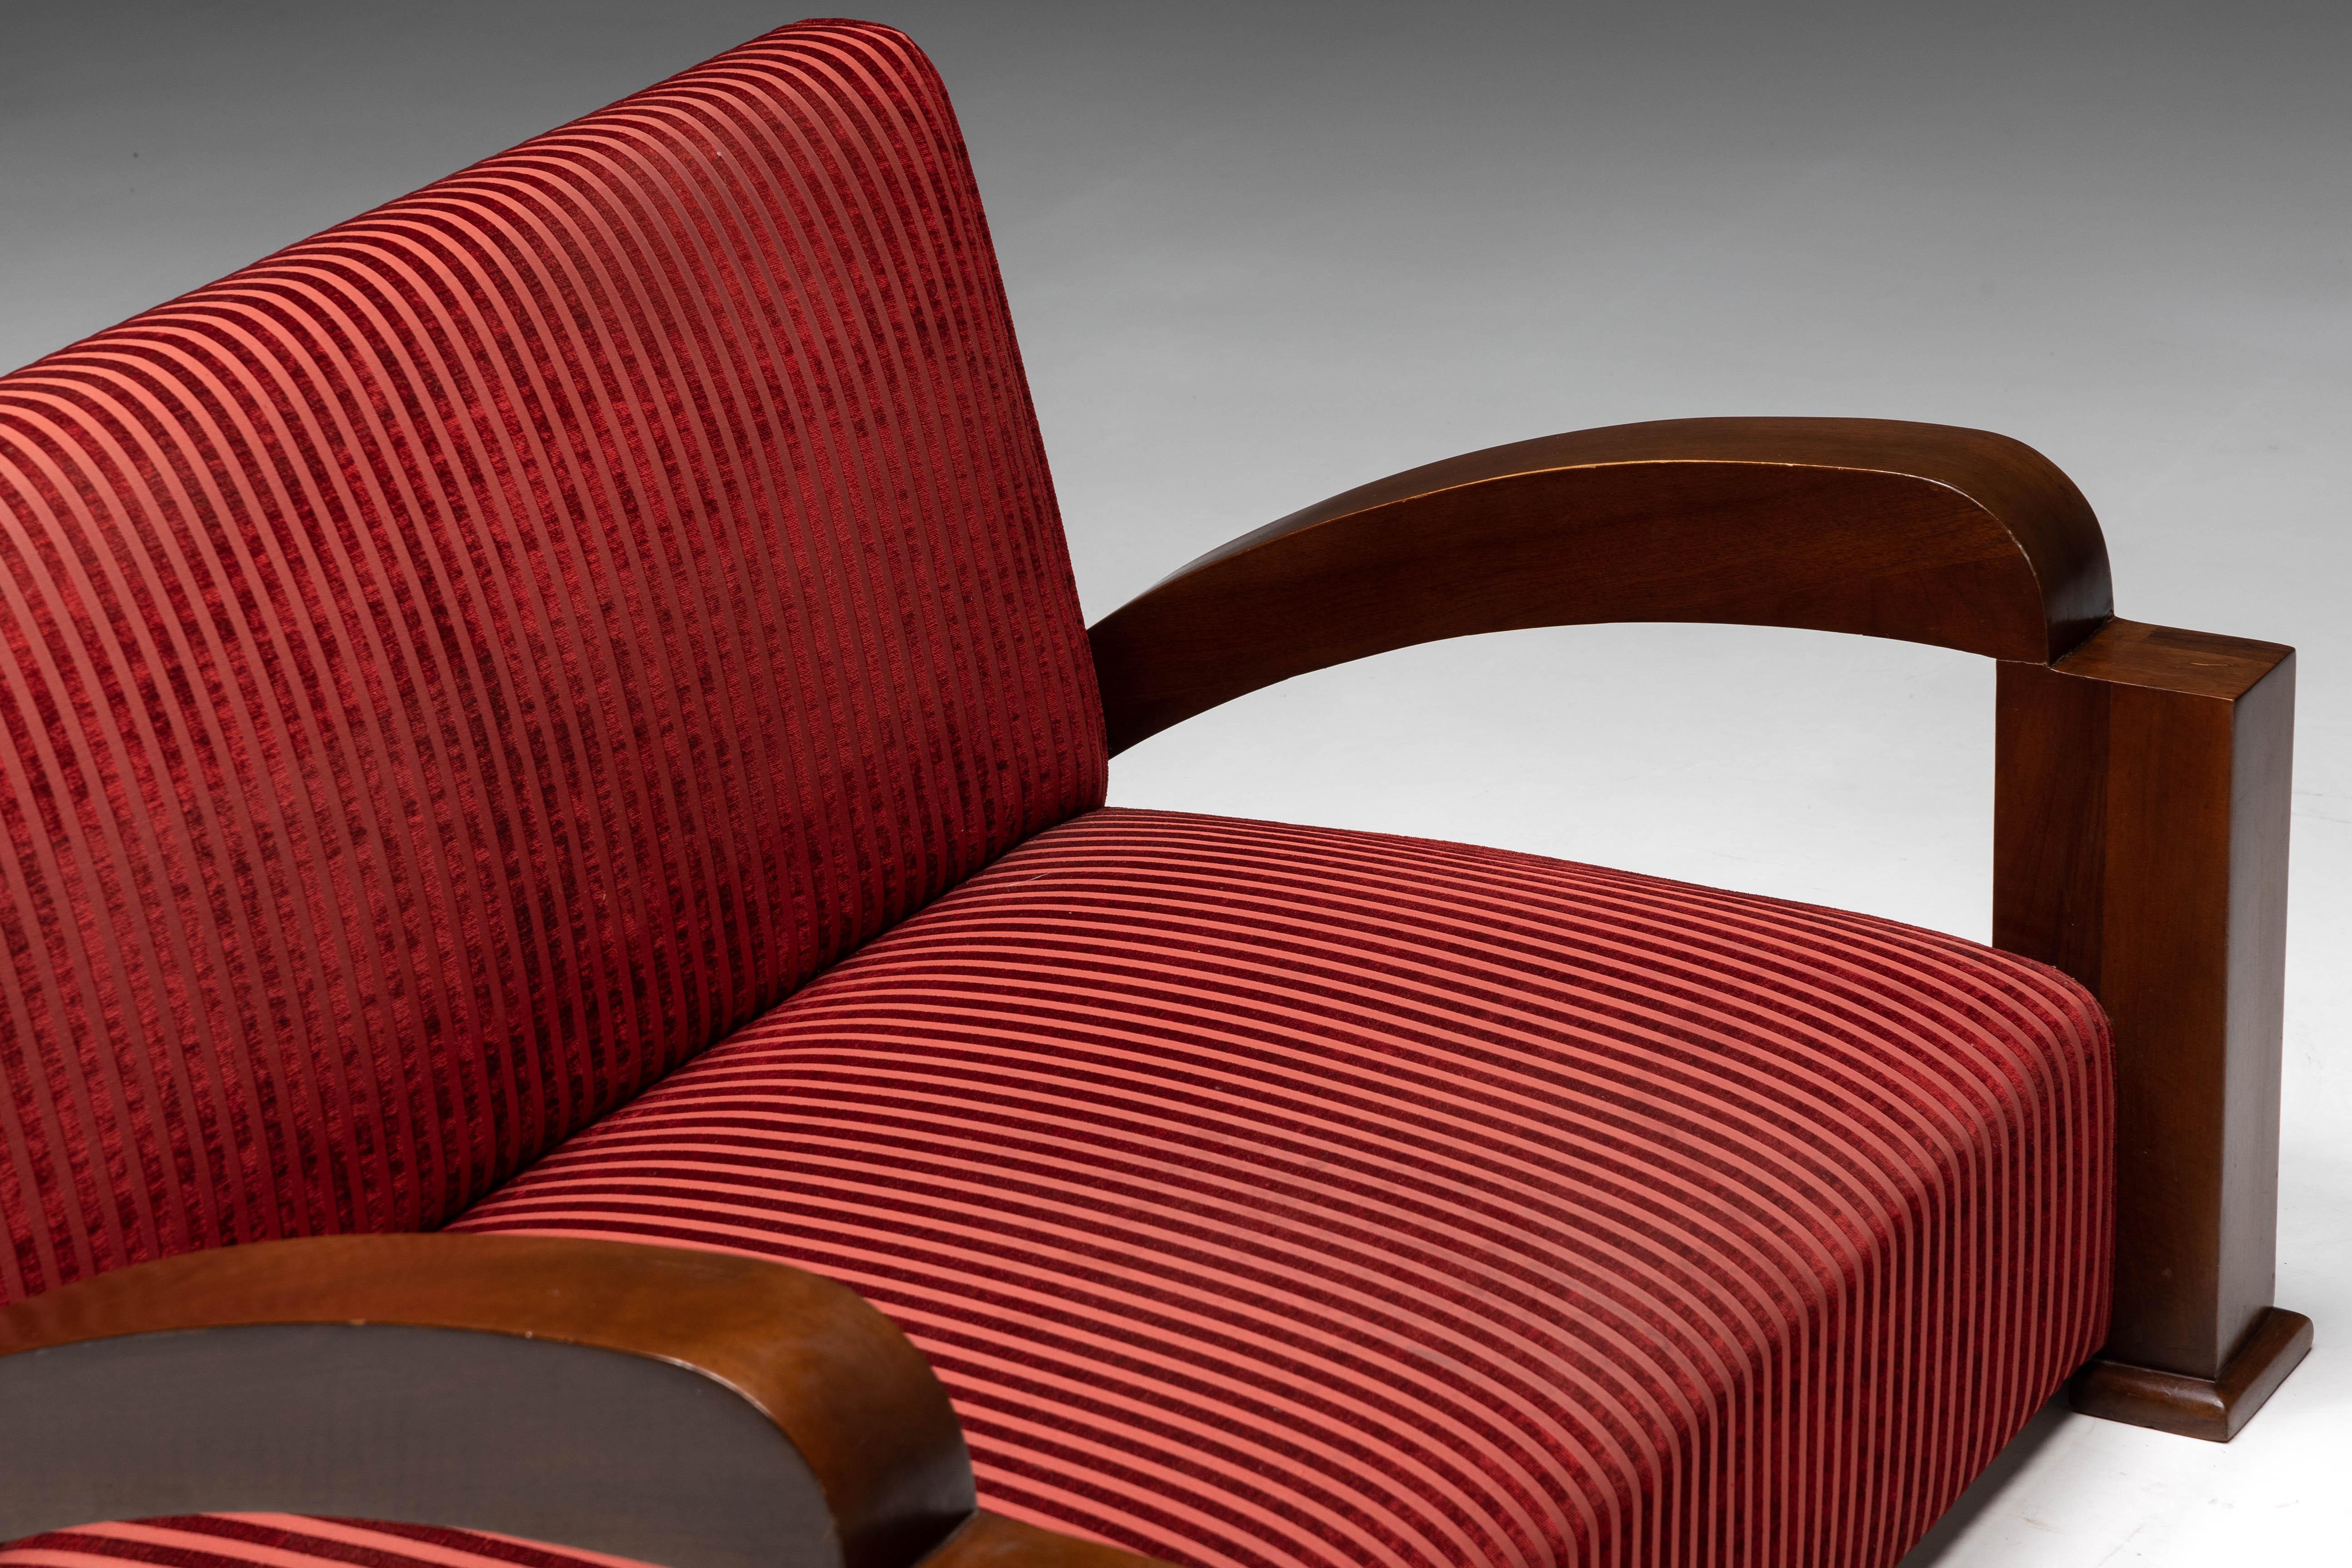 Art Deco Sofa in Red Striped Velvet and with Swoosh Armrests, France, 1940s For Sale 1